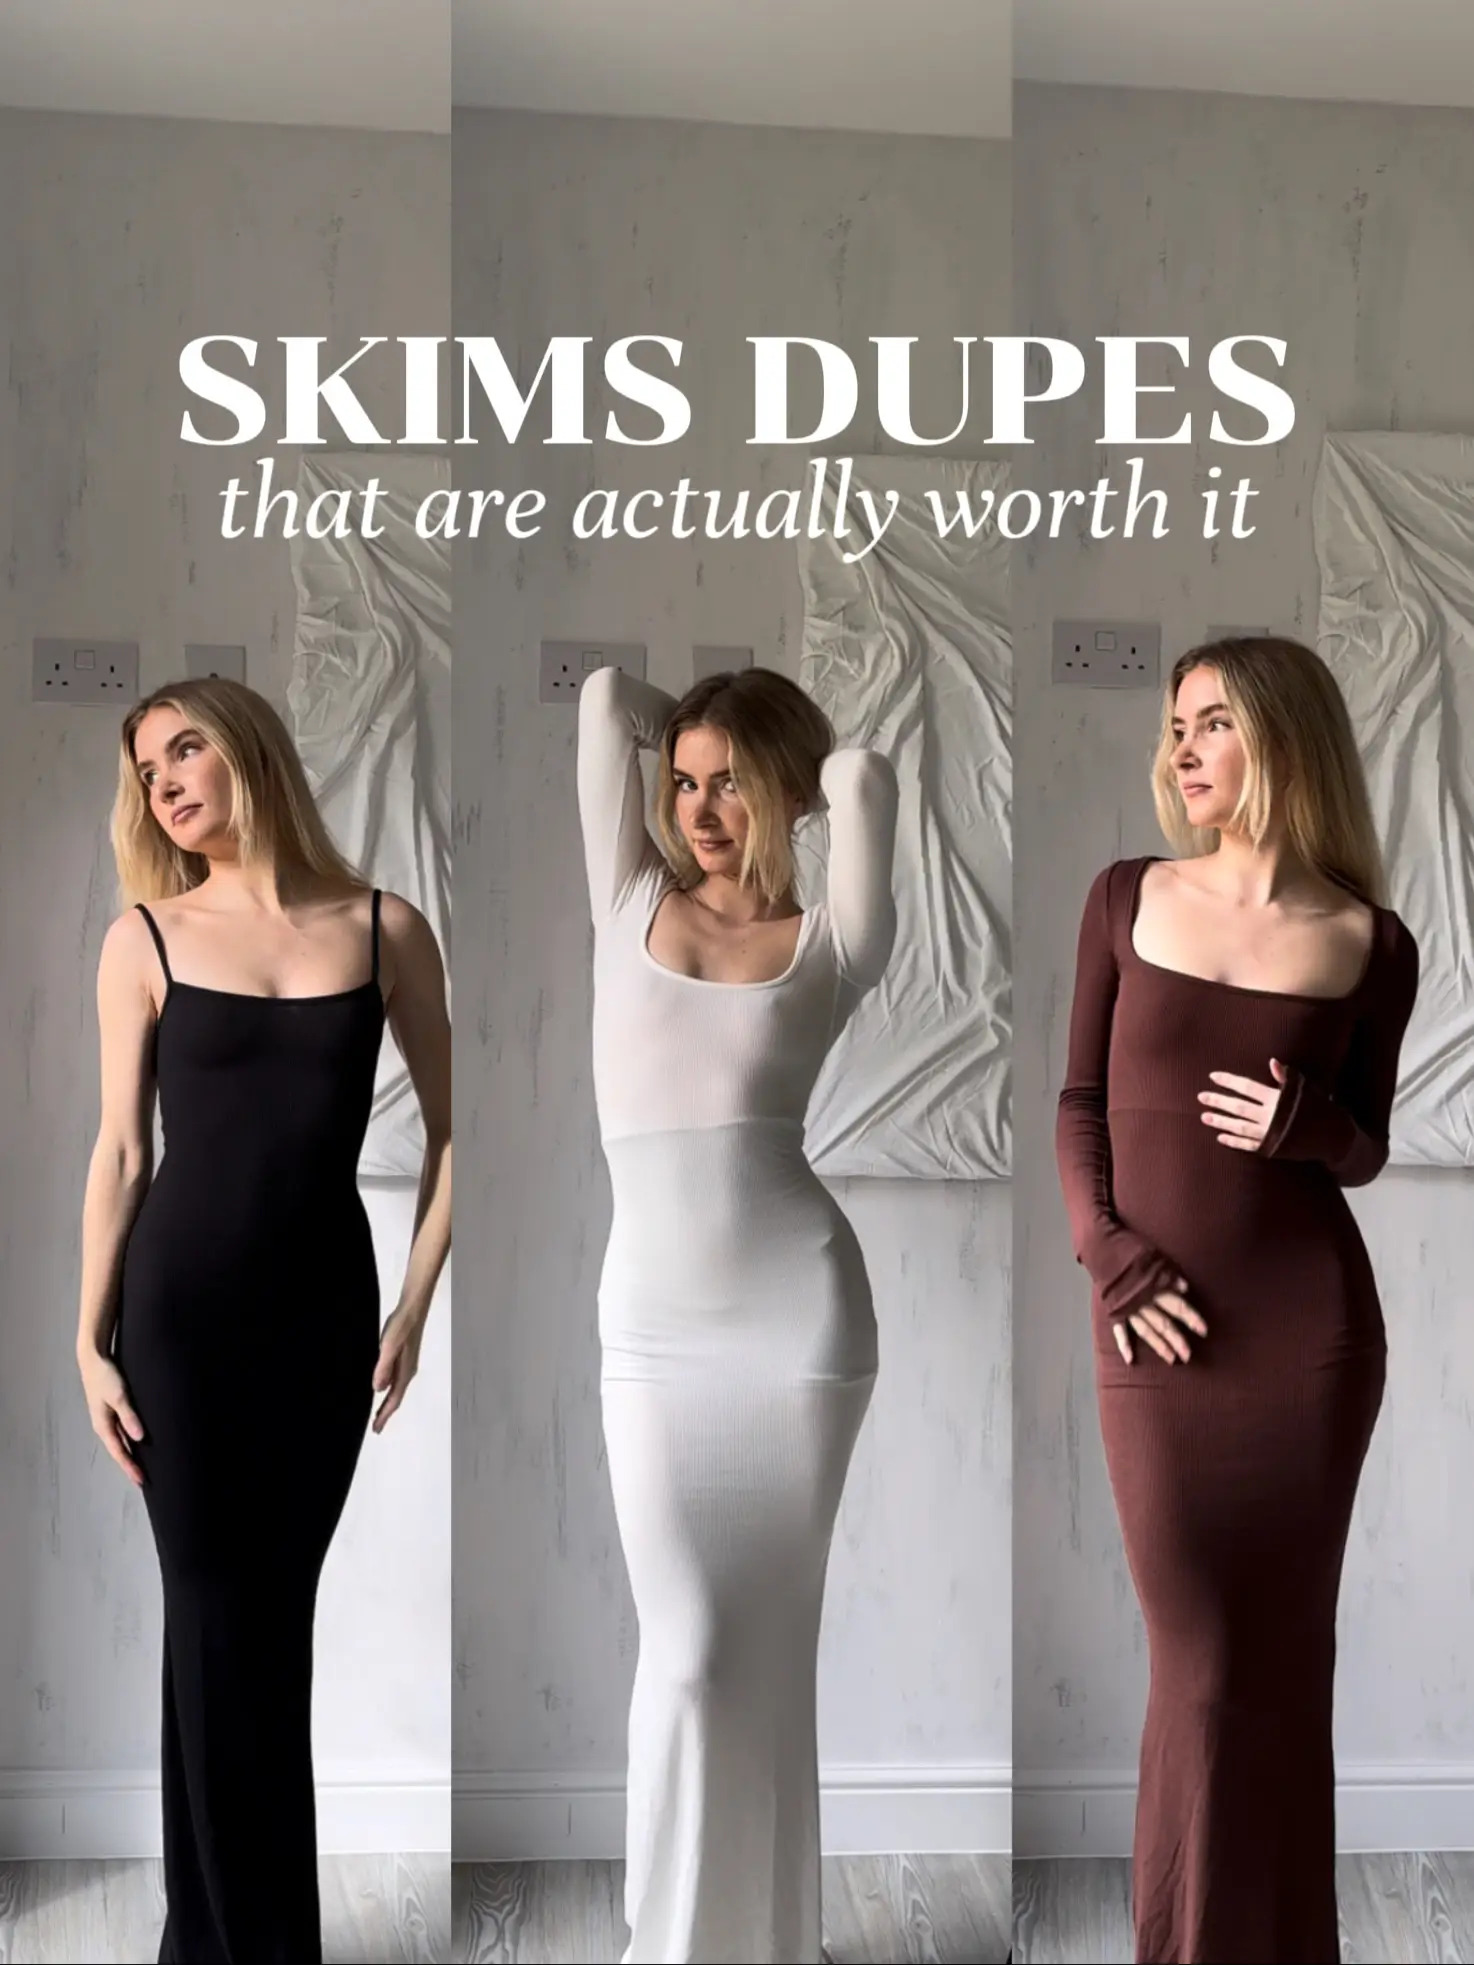 Skims dupes that are worth it💋🤌, Gallery posted by Lauren Seale